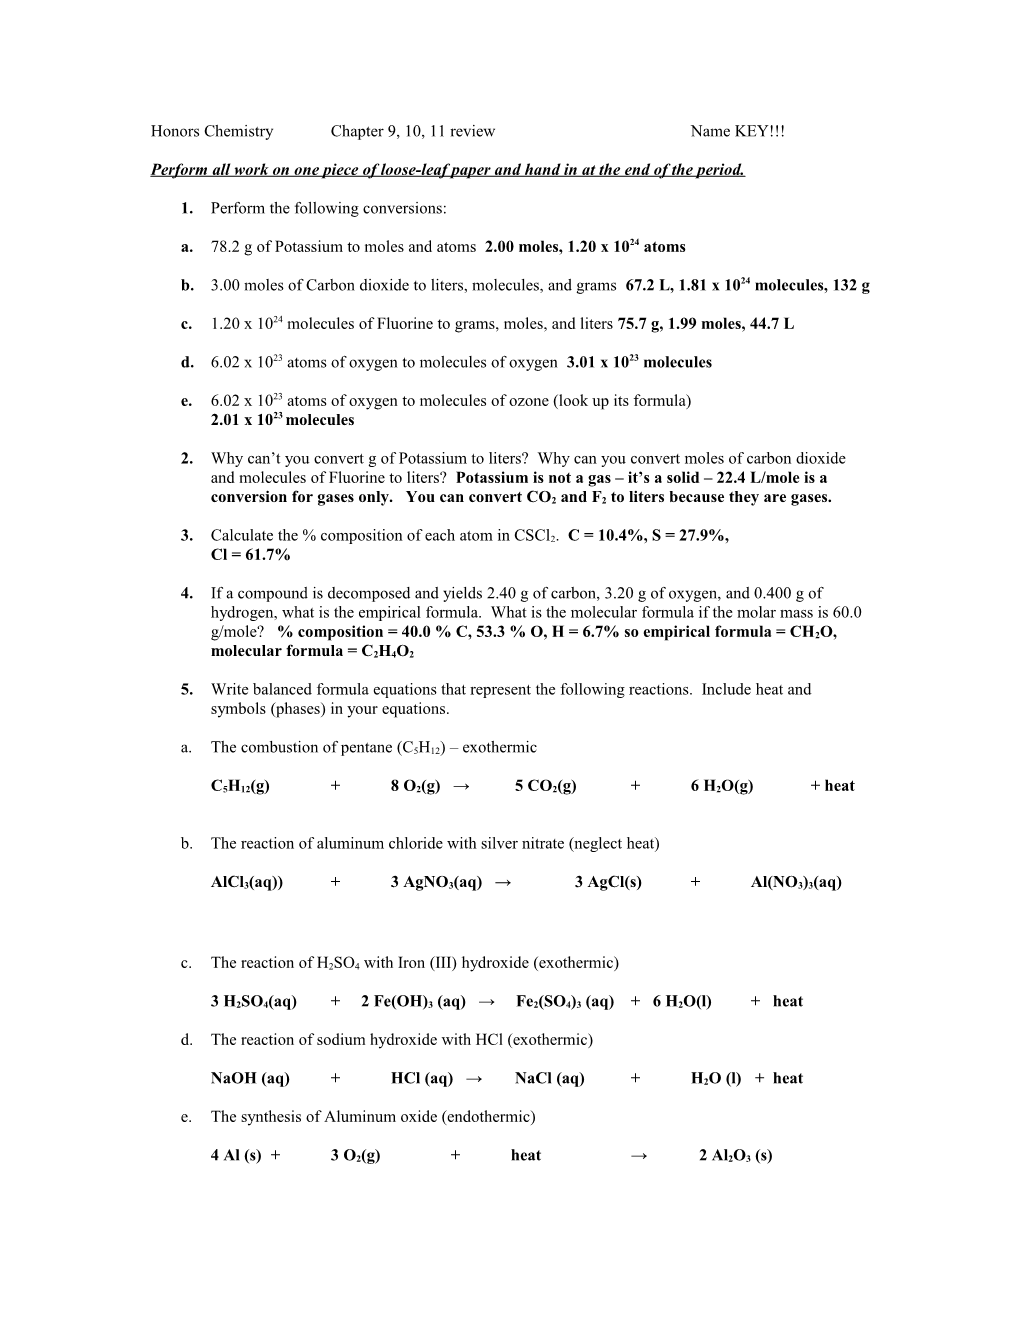 Honors Chemistry Chapter 9, 10, 11 Review Name KEY